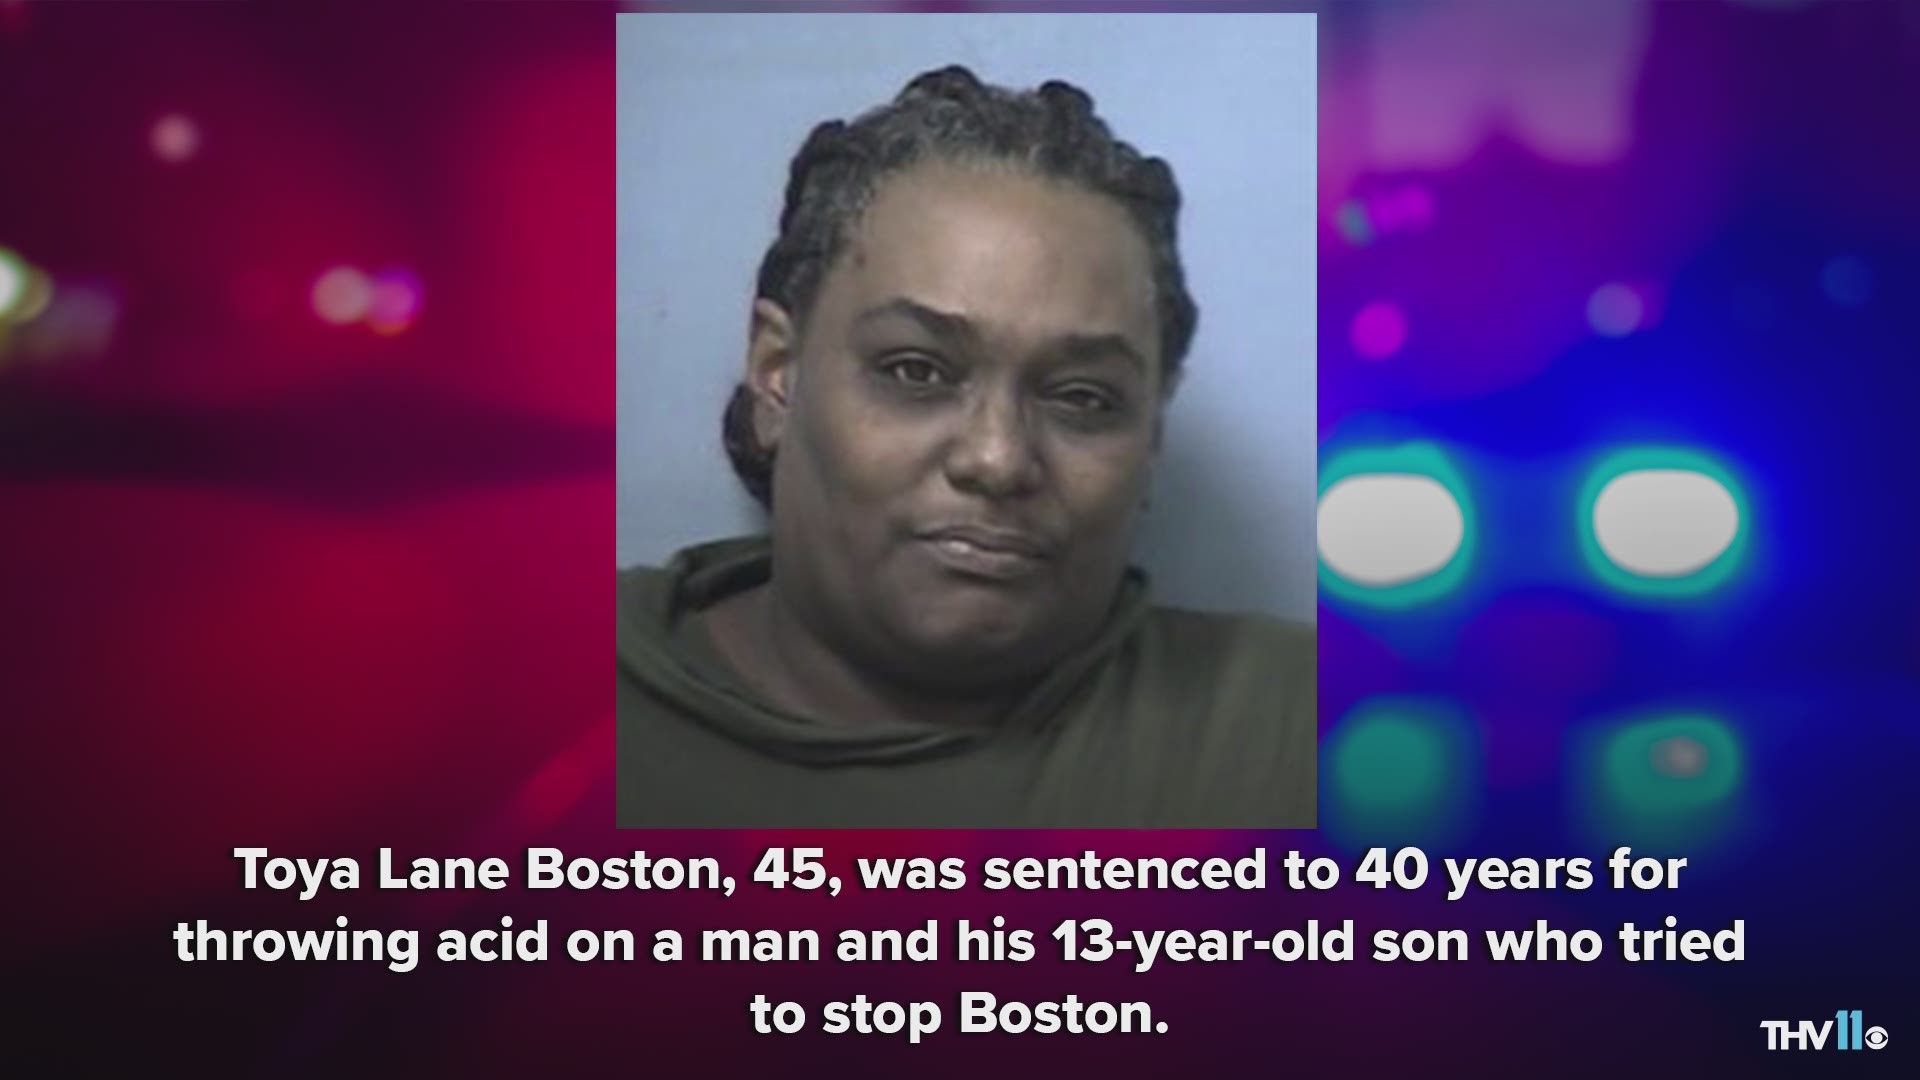 Toya Boston, 45, has been sentenced to 40 years in prison for throwing acid on her ex-boyfriend and his son.